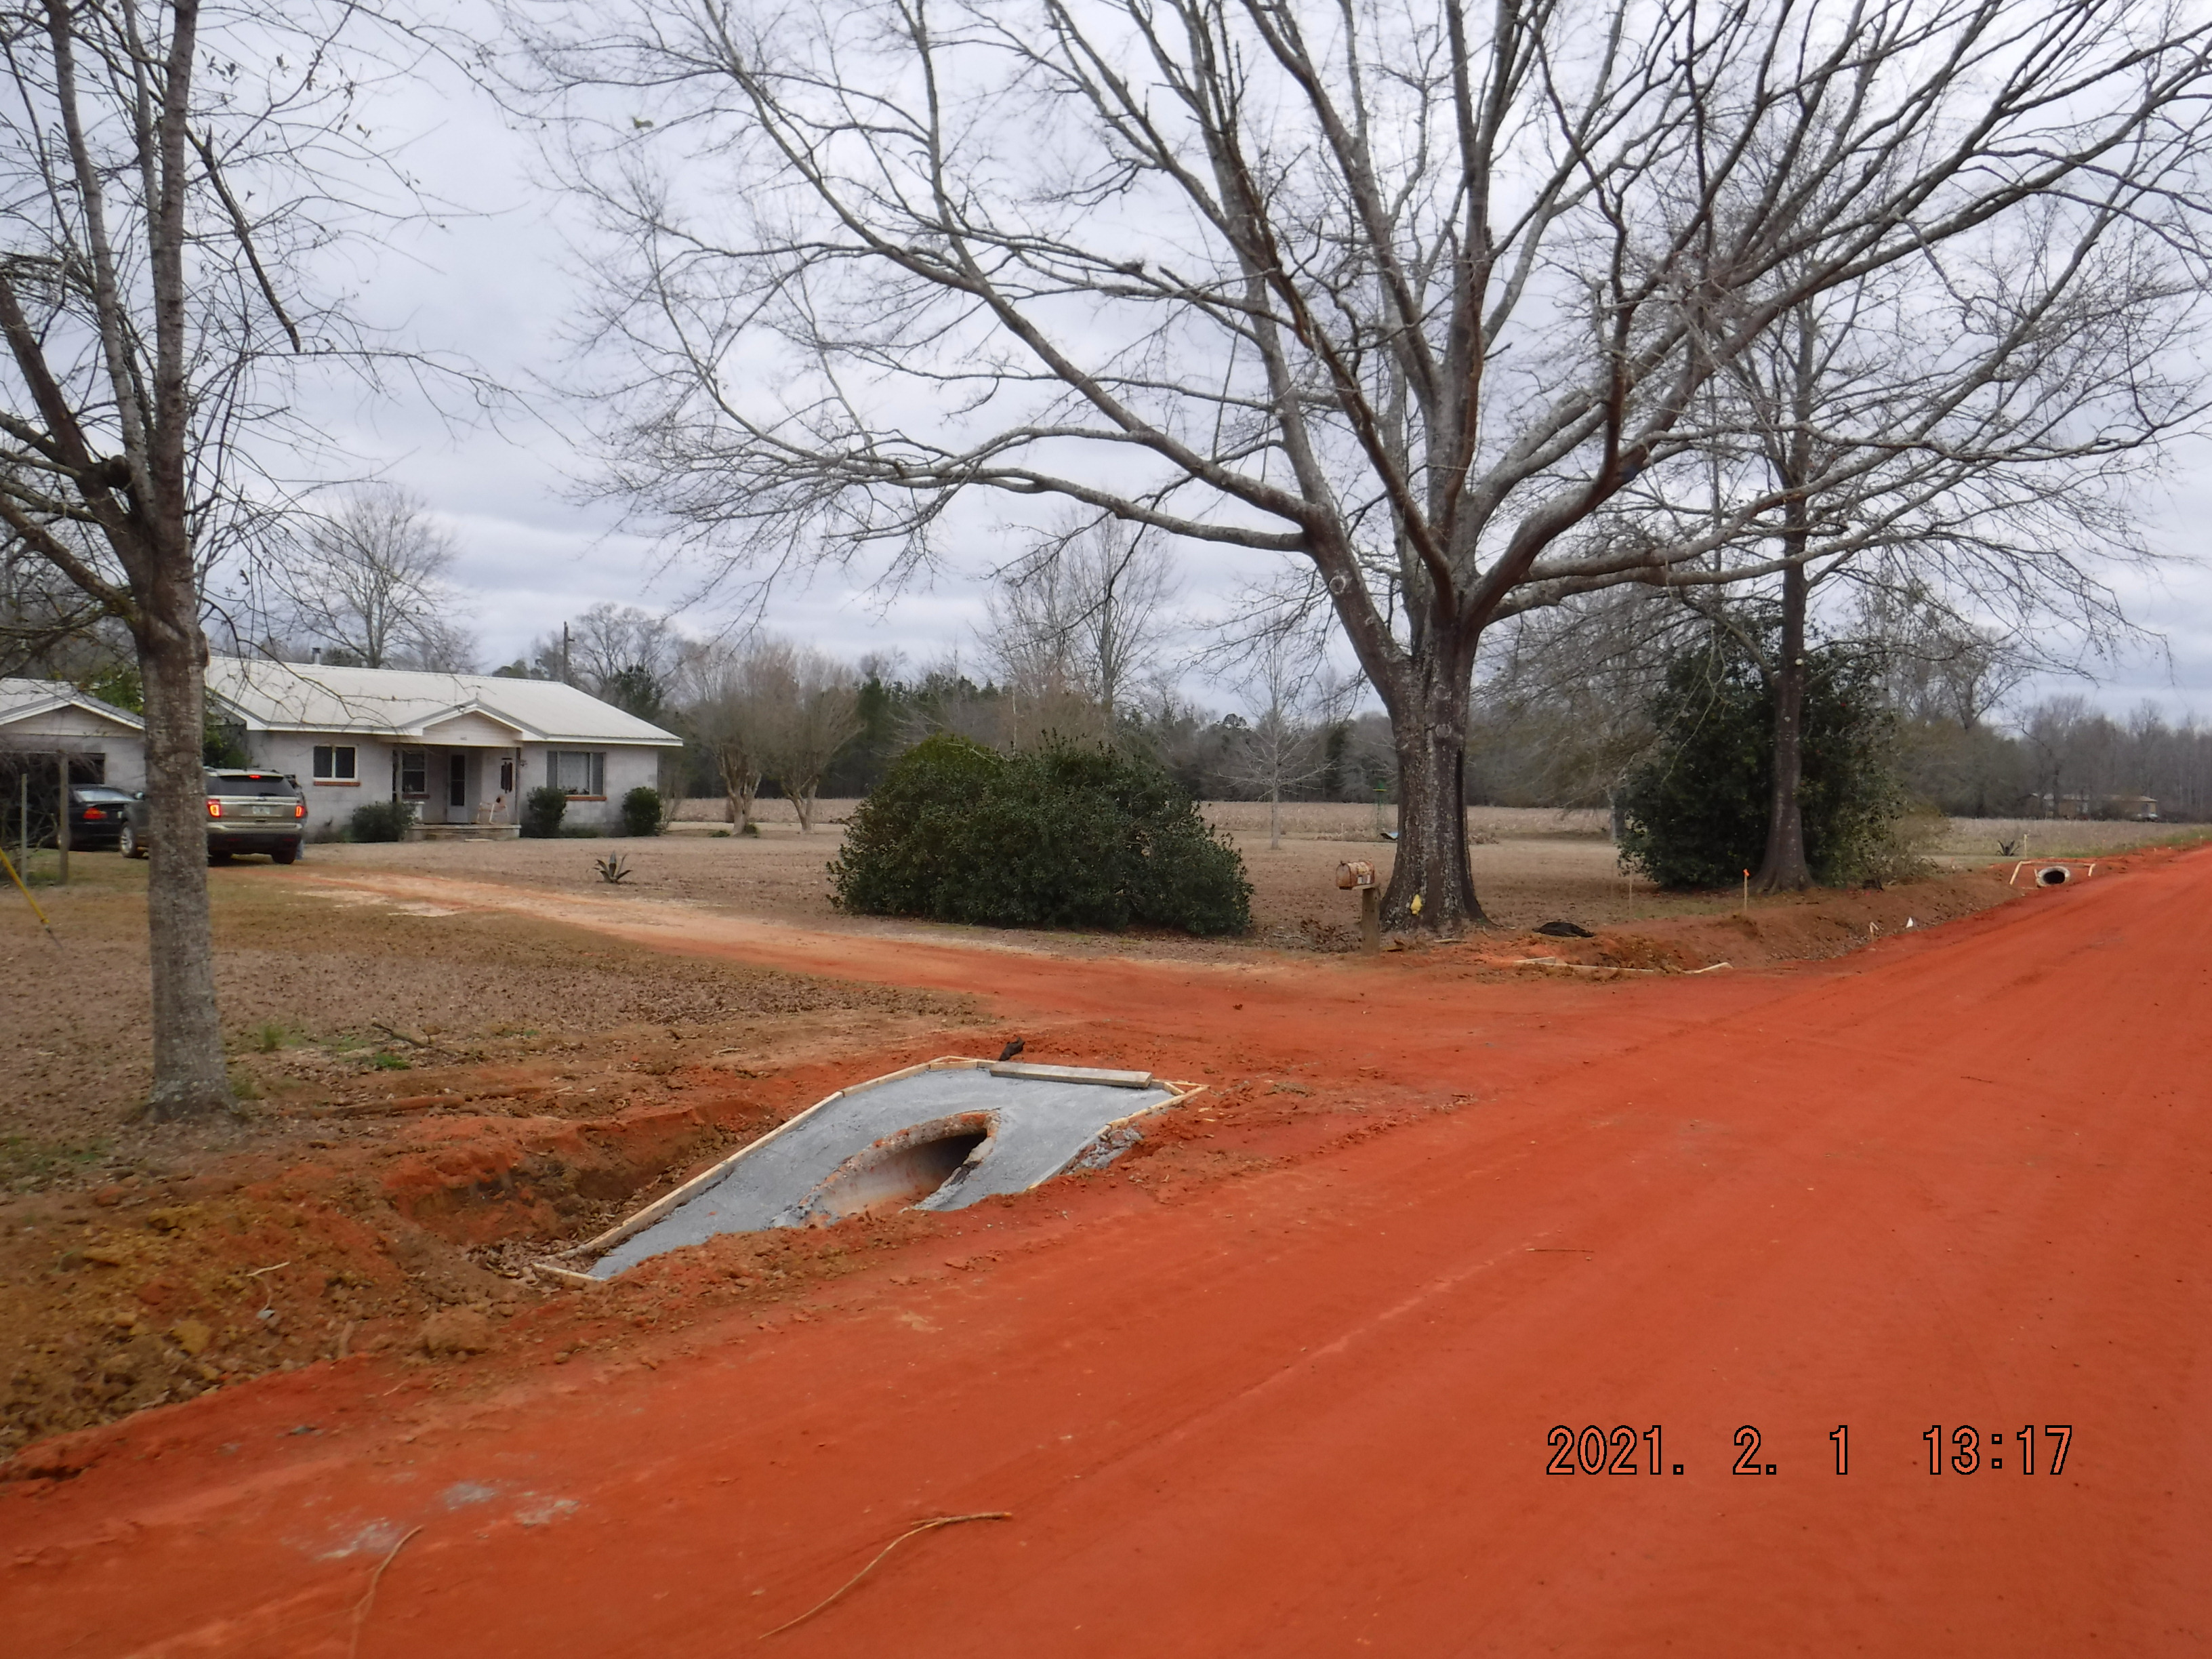 Photo of Typical Driveway Improvement on Ashcraft Dirt Road Paving &amp; Drainage project